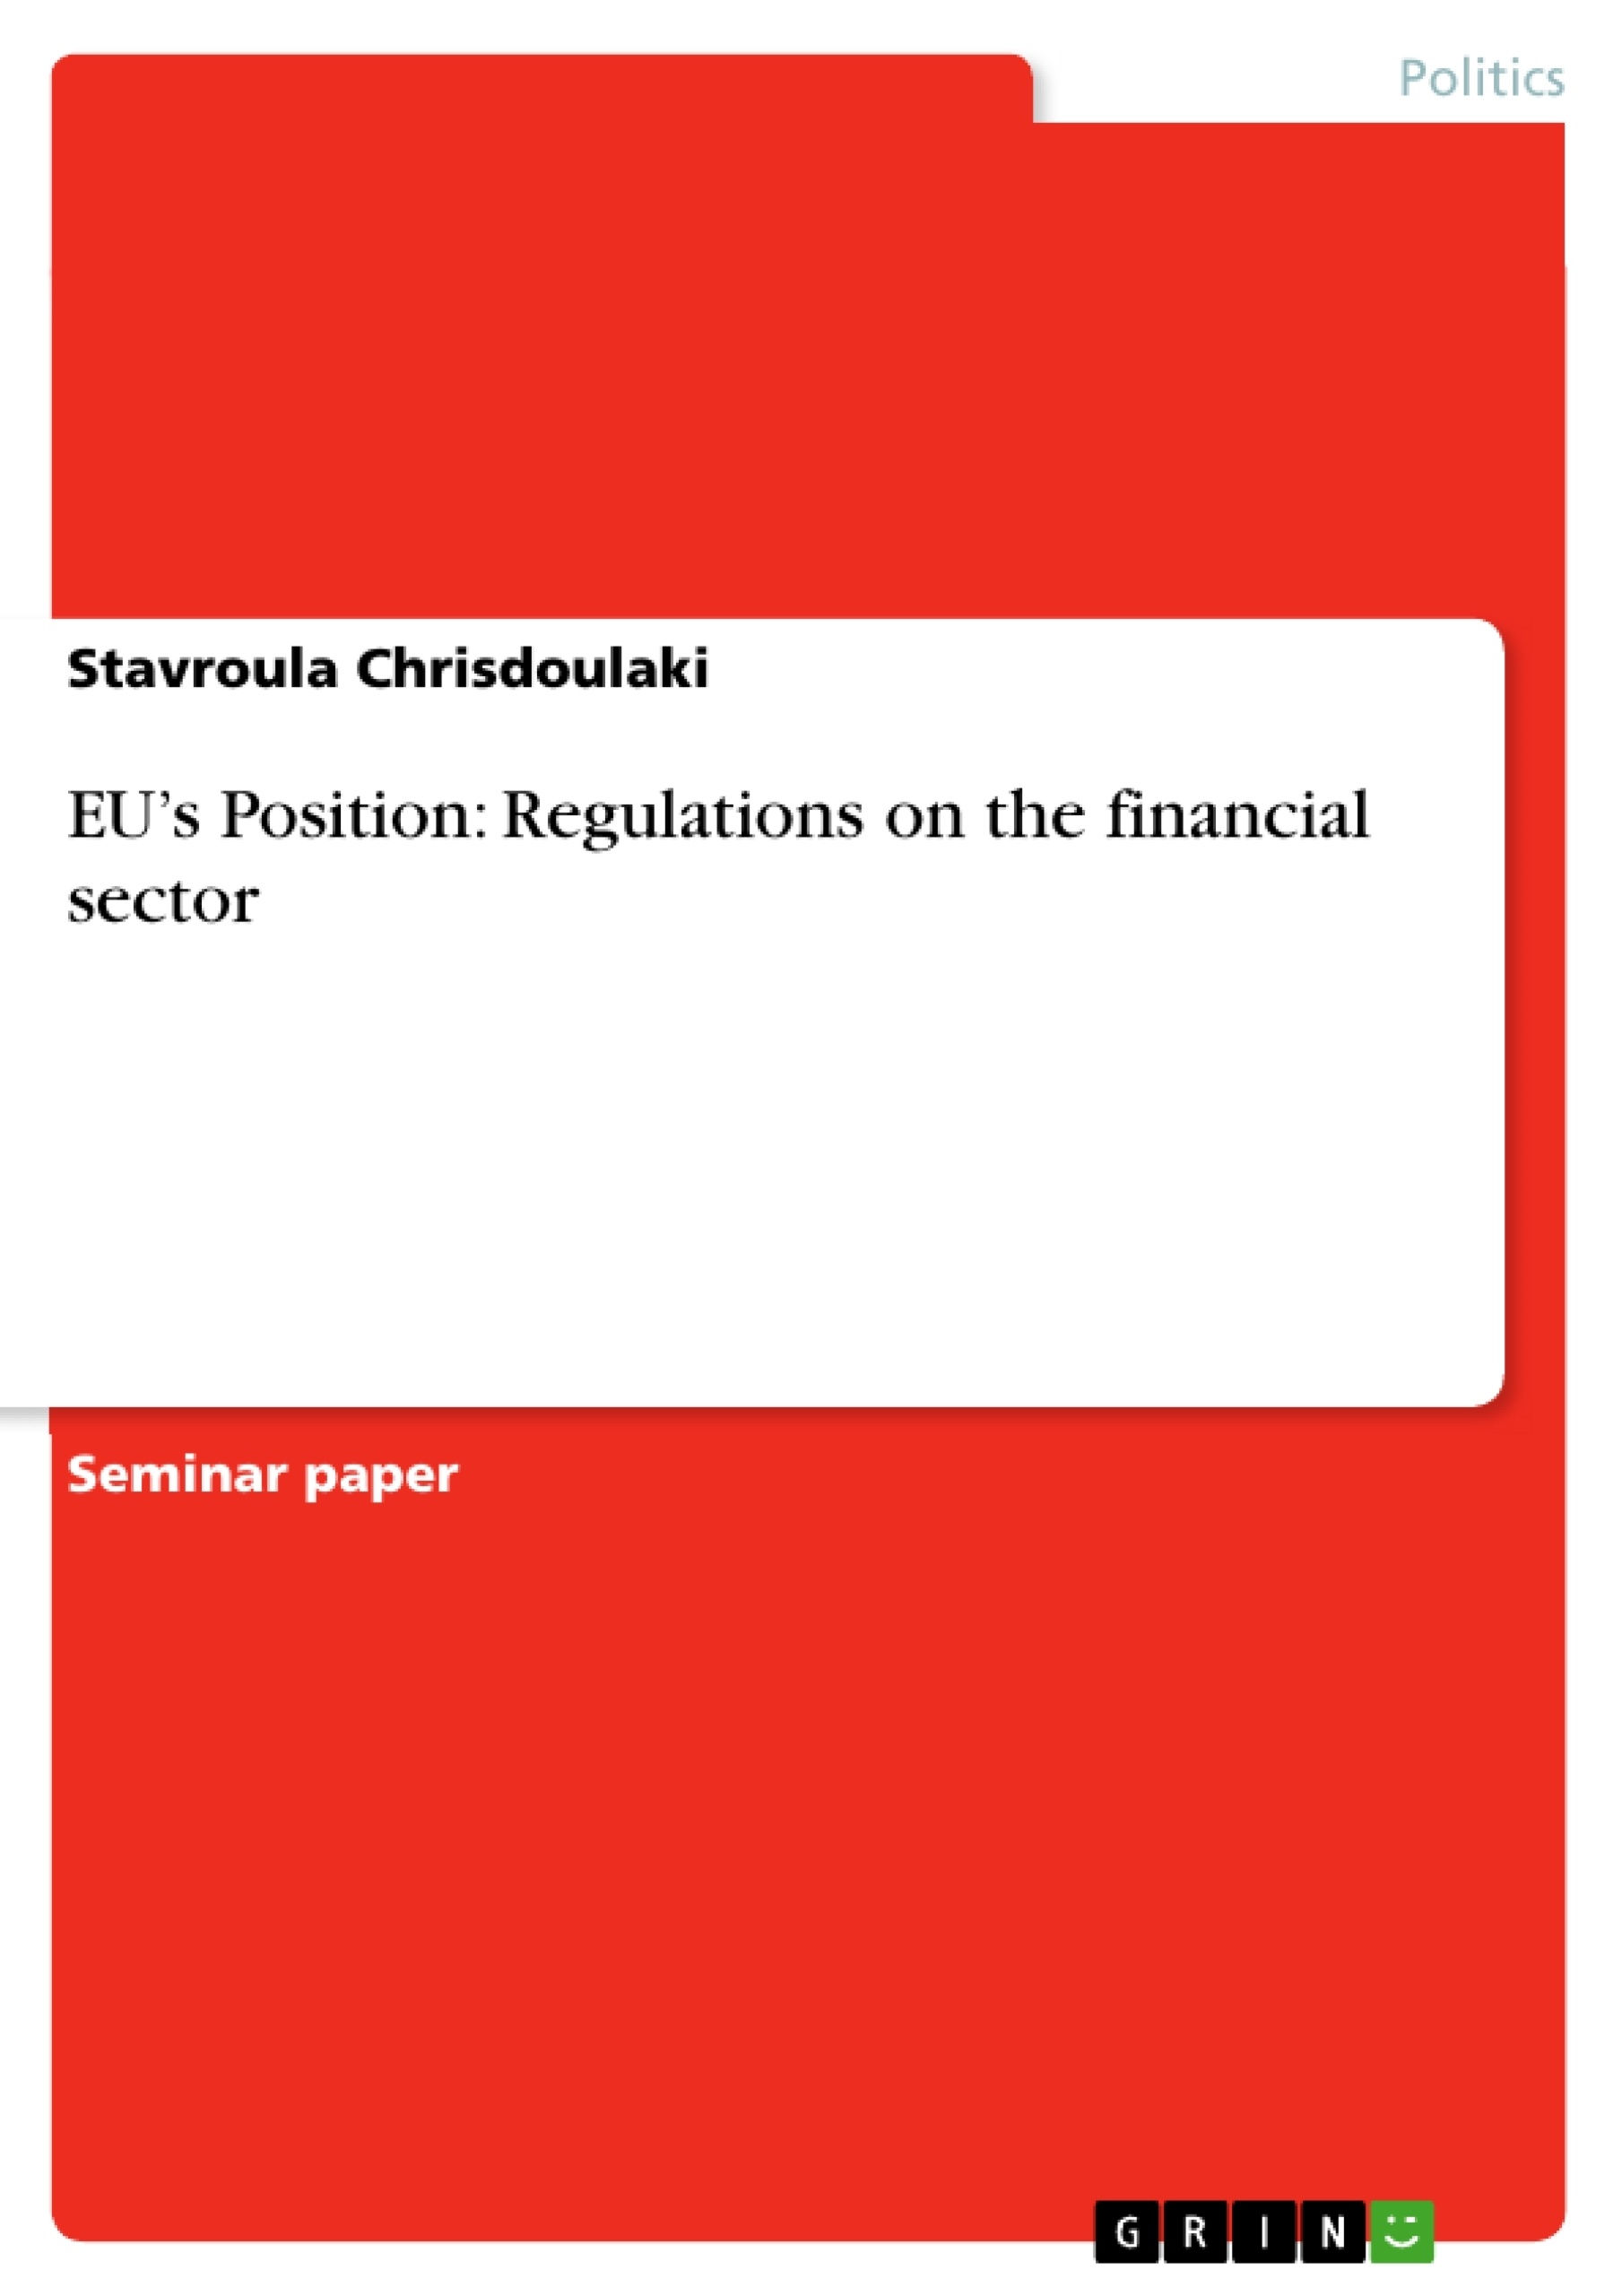 Título: EU’s Position: Regulations on the financial sector